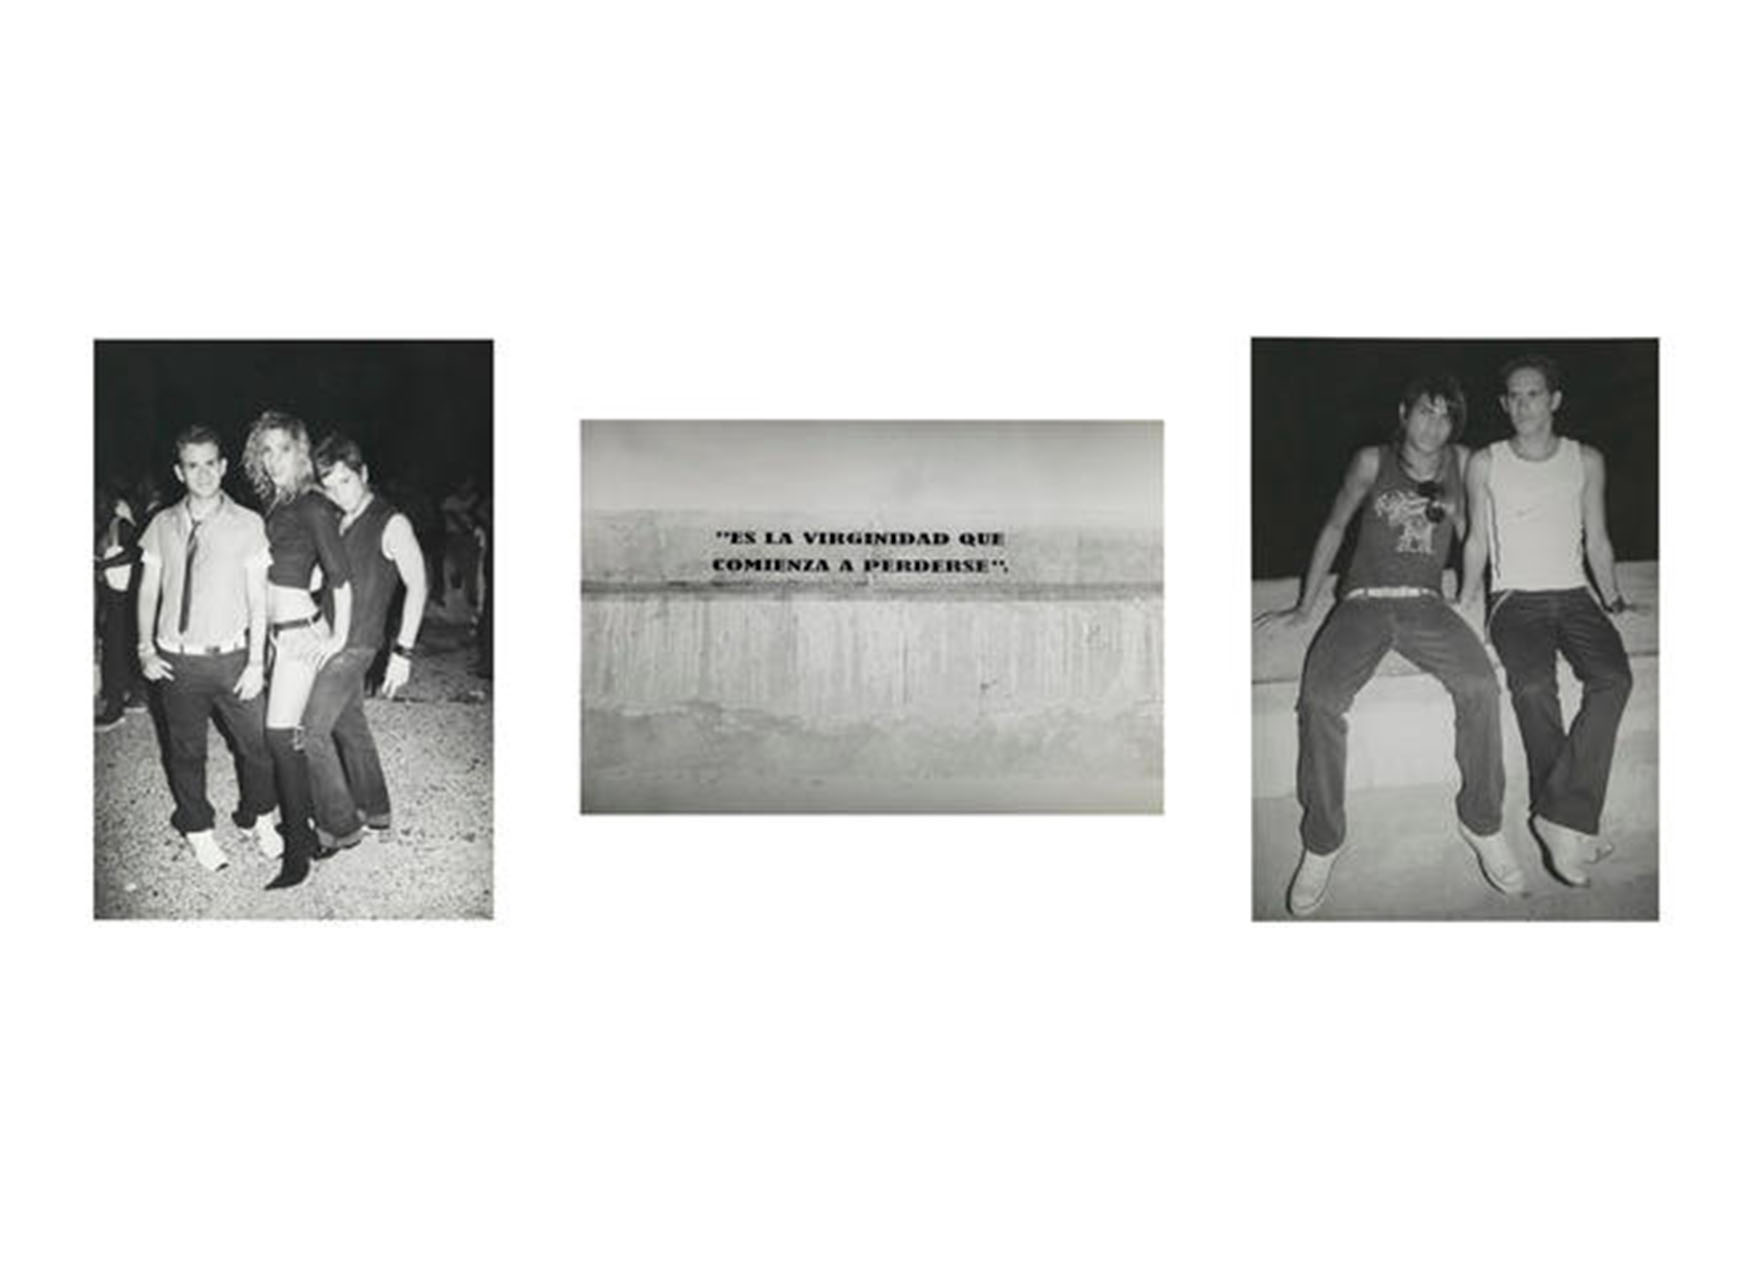 left: night, outdoors, three figures pose for camera two wearing jeans and center figure shorts, high heel tall boots and tied shirt. middle: stone wall with applied text: "ES LA VIRGINIDAD QUE / COMIENZA A PERDERSE". right: night, outdoors, two men sitting on low concrete wall each wearing jeans, sneakers, T shirts, necklaces, left figure with sunglasses attached to shirt and tattoo on his shoulder